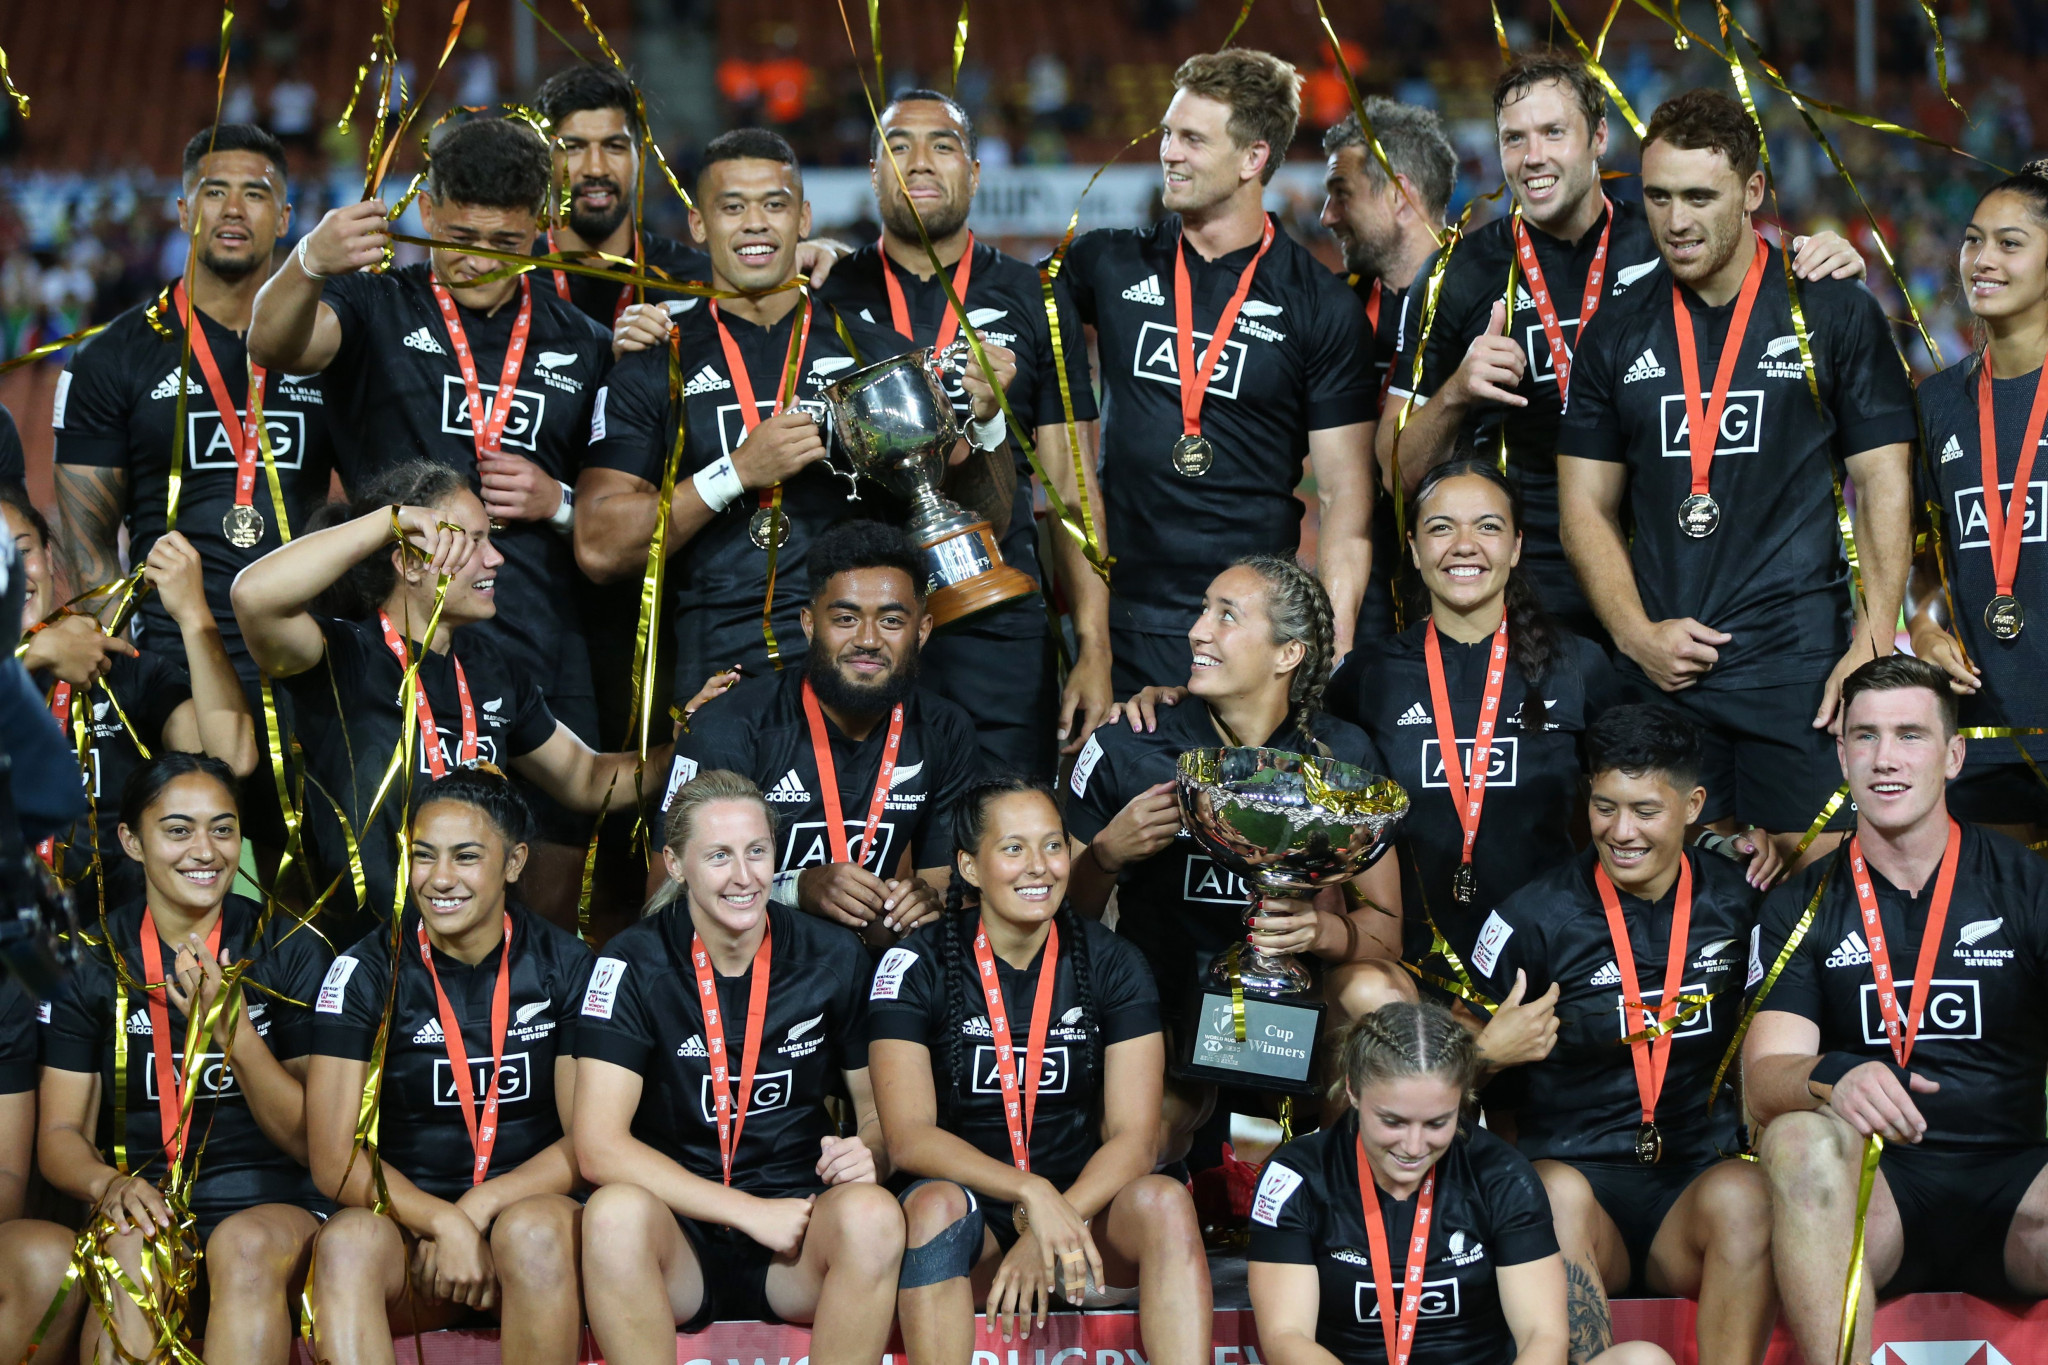 New Zealand's men's and women's teams celebrate together after winning both competitions in the third leg of the Sevens Series ©Getty Images